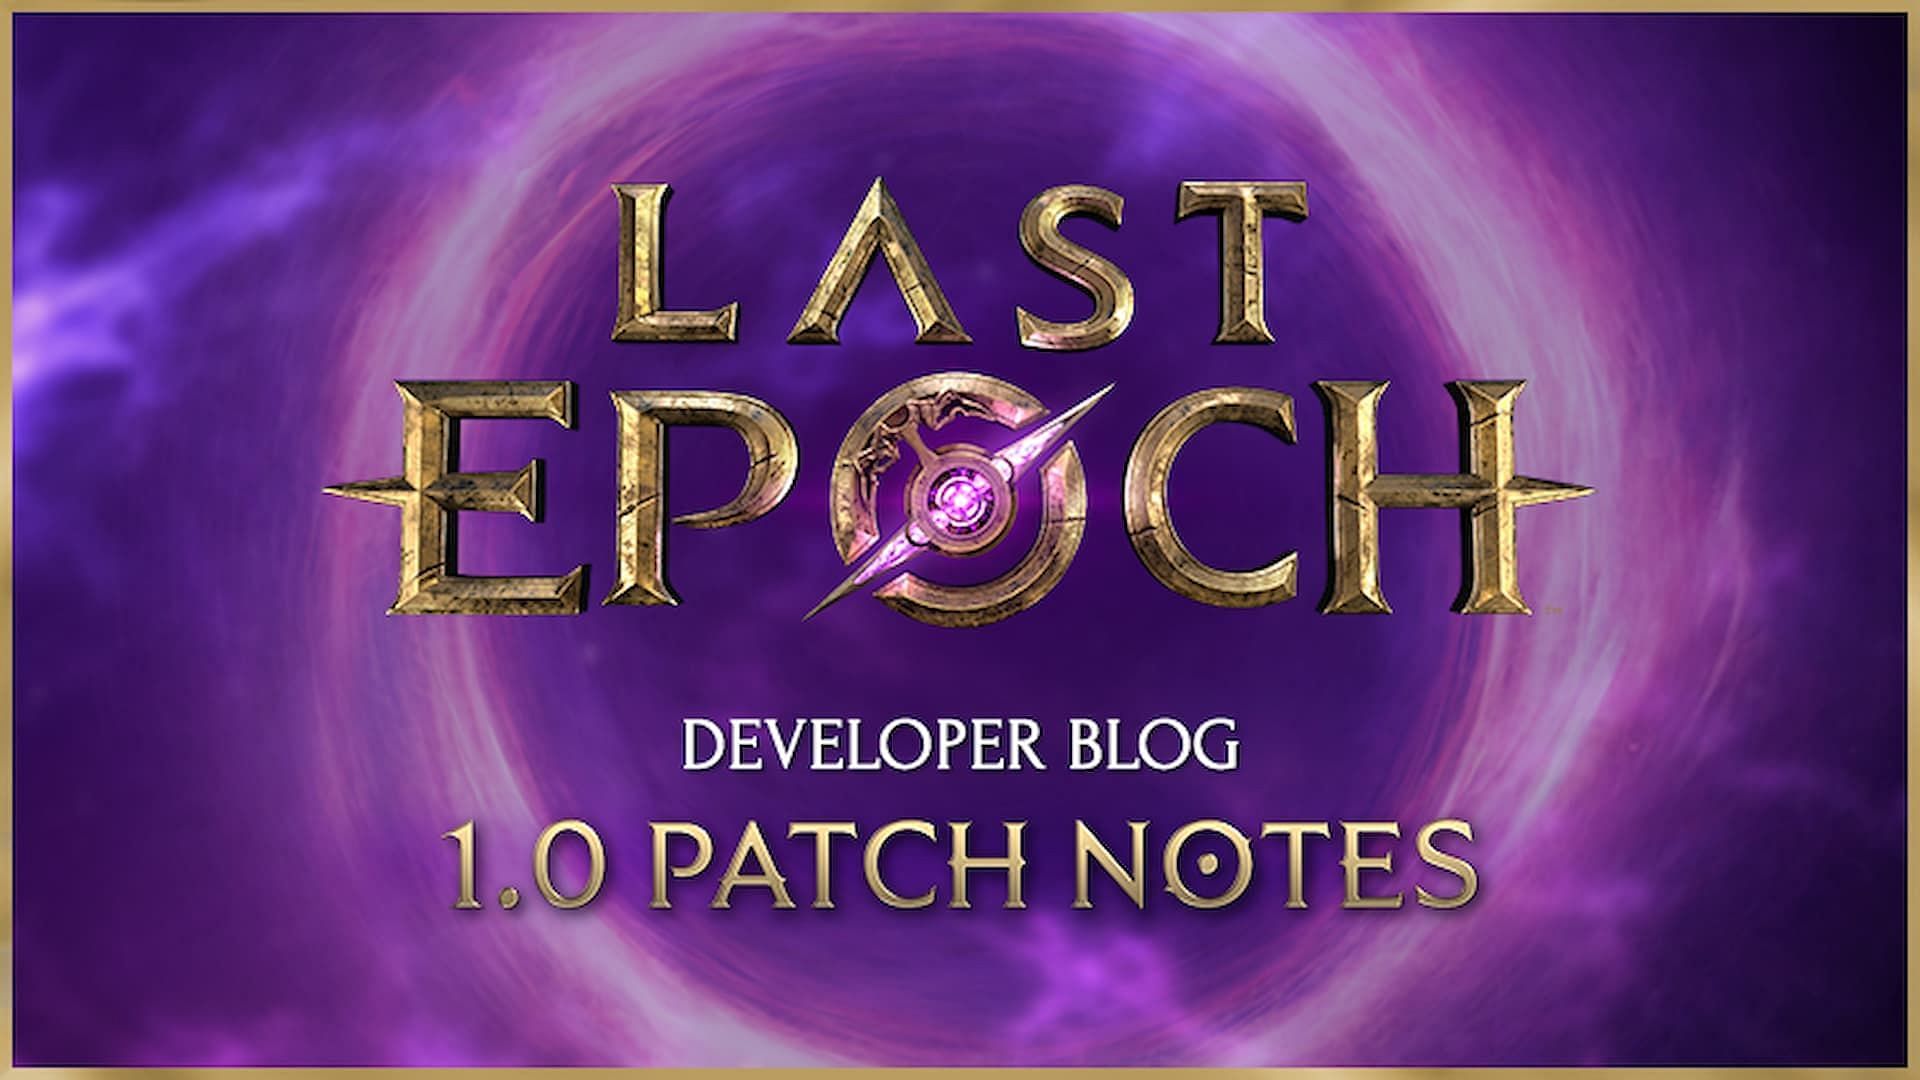 Dev blog to let the players know what the upcoming patch will be like (Image via Last Epoch forum)